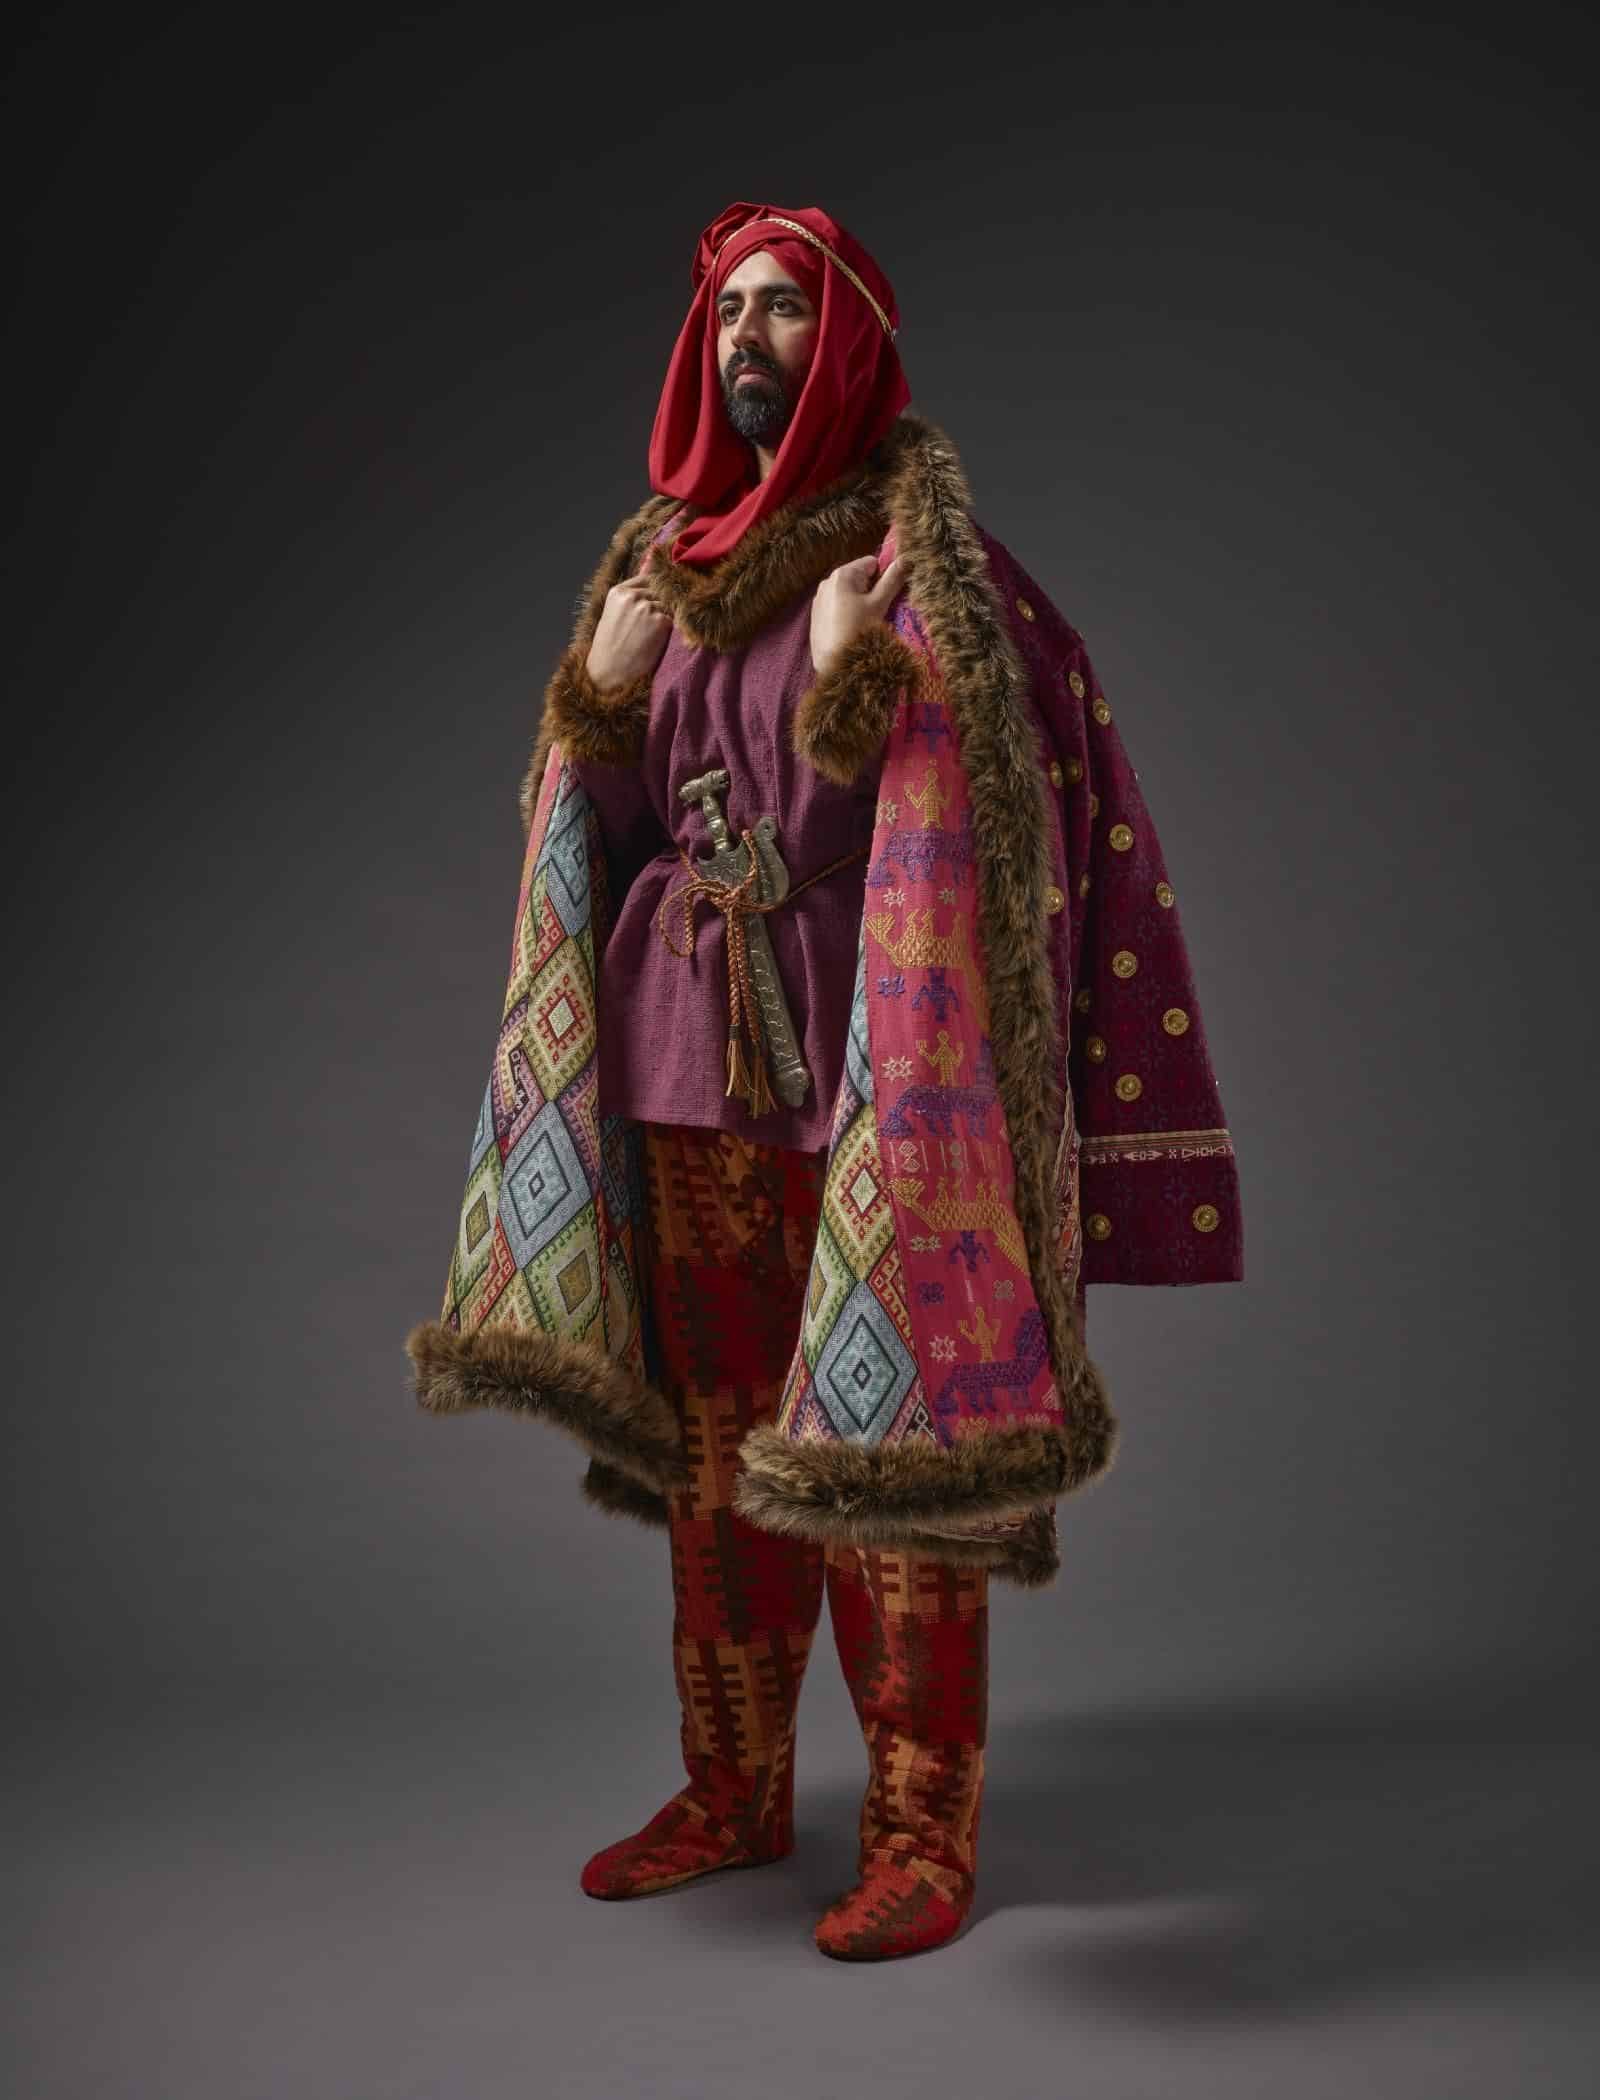 Recreation Of Persian Riding Dress From About Bc, Showing A Riding Coat. Lamb's Wool, Faux Fur And Metallic Appliqués. Designed By Lloyd Llewellyn Jones, Sewn By Rebecca Southall.